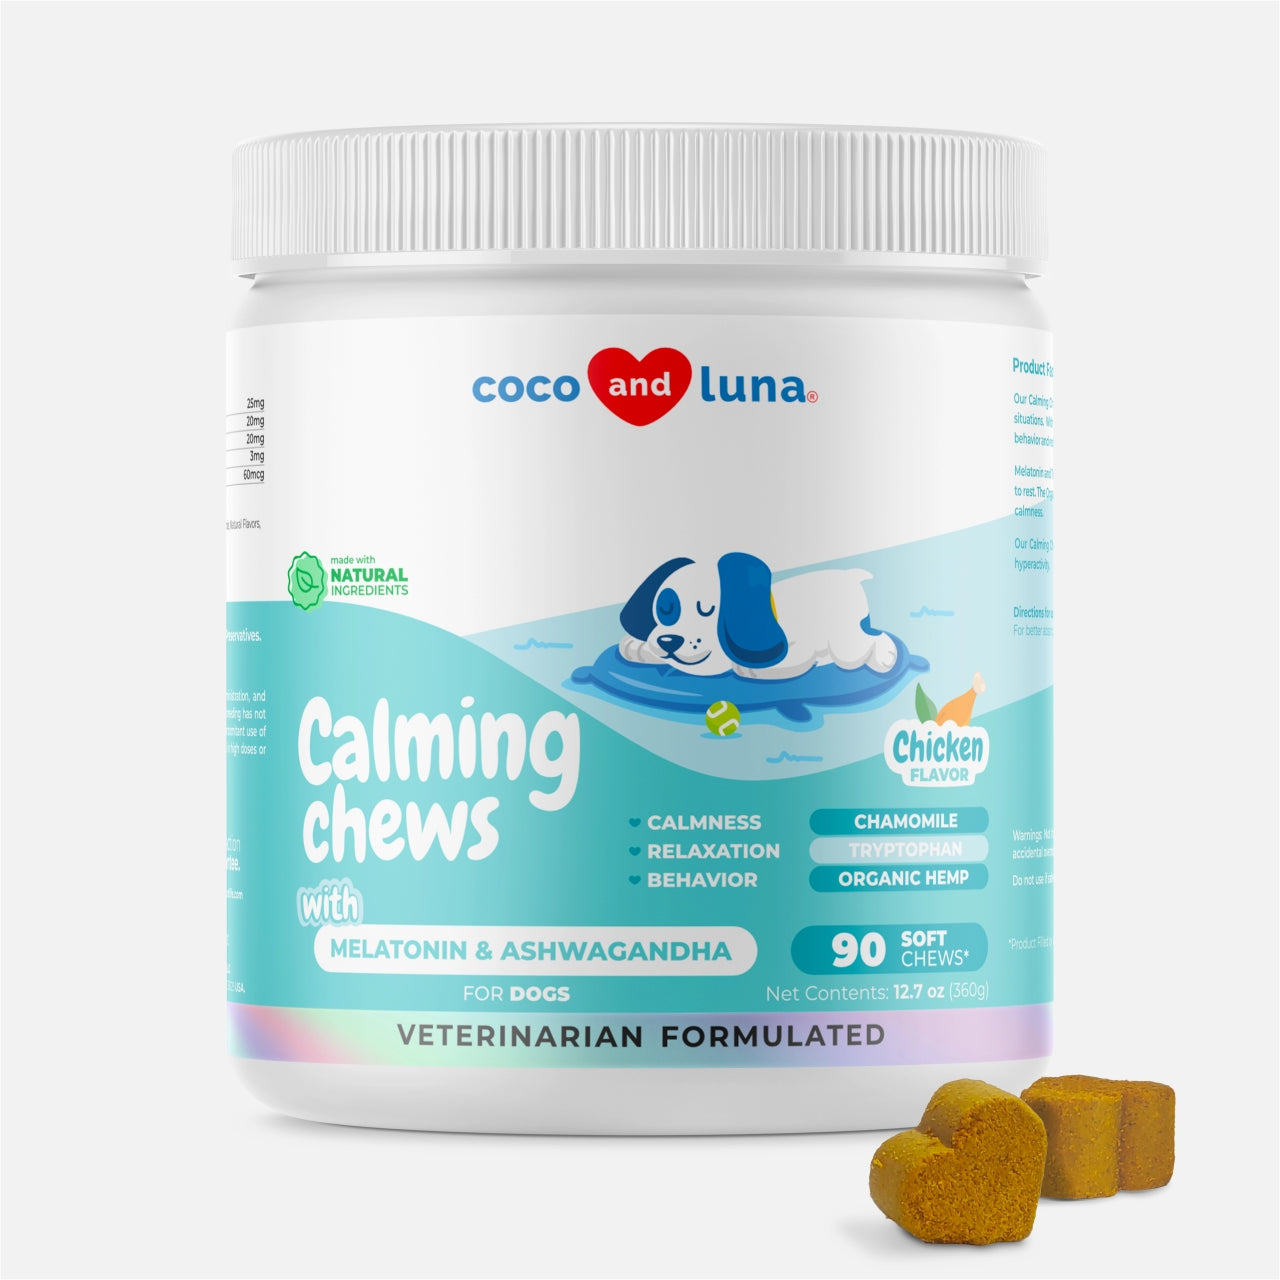 Calming Chews for Dogs - 90 Soft Chews - Coco and Luna